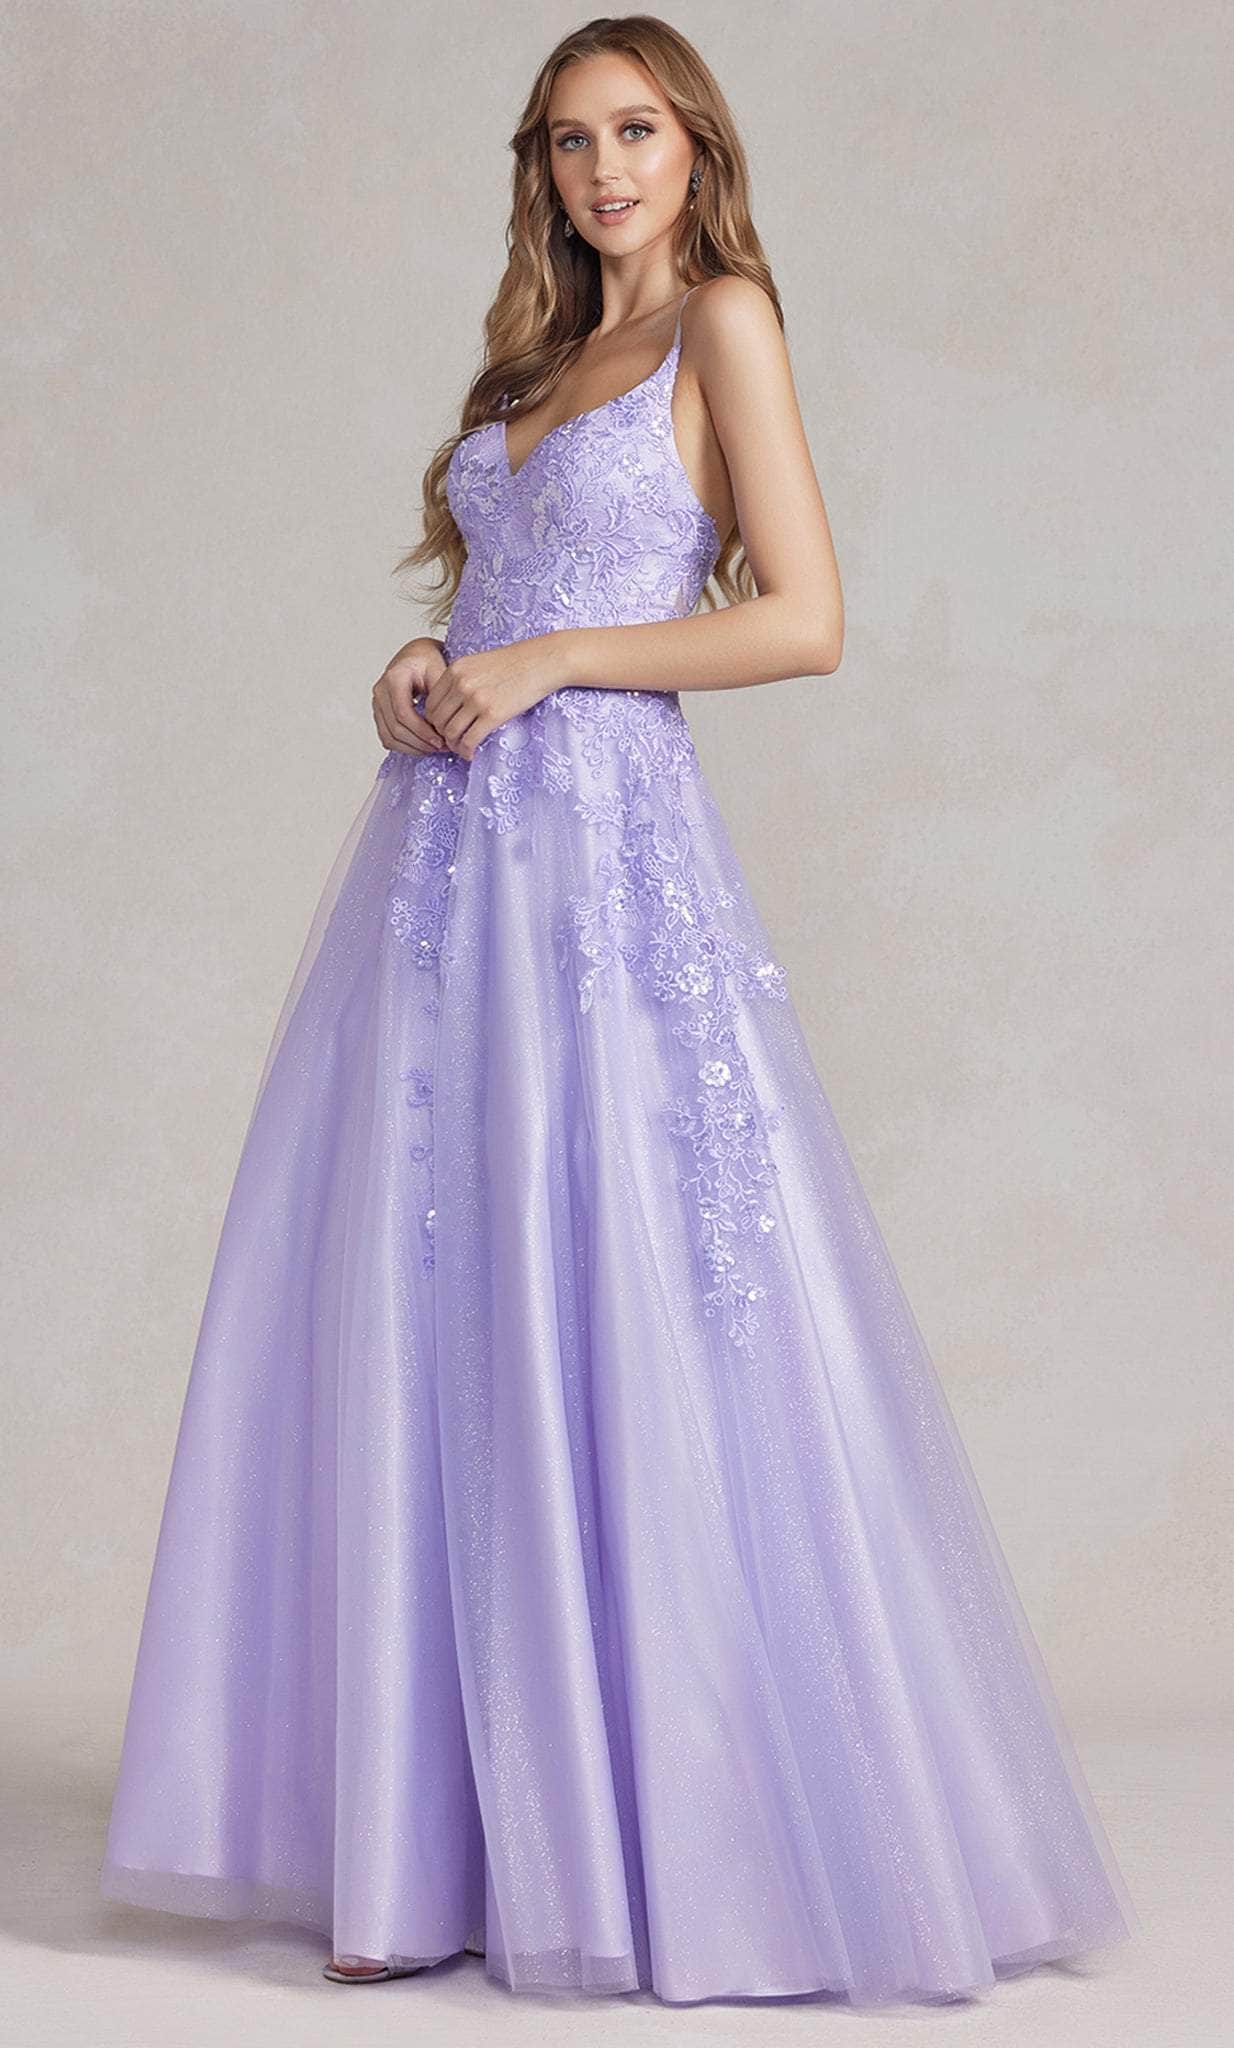 Nox Anabel E1178 - Embroidered Bodice Prom Gown
